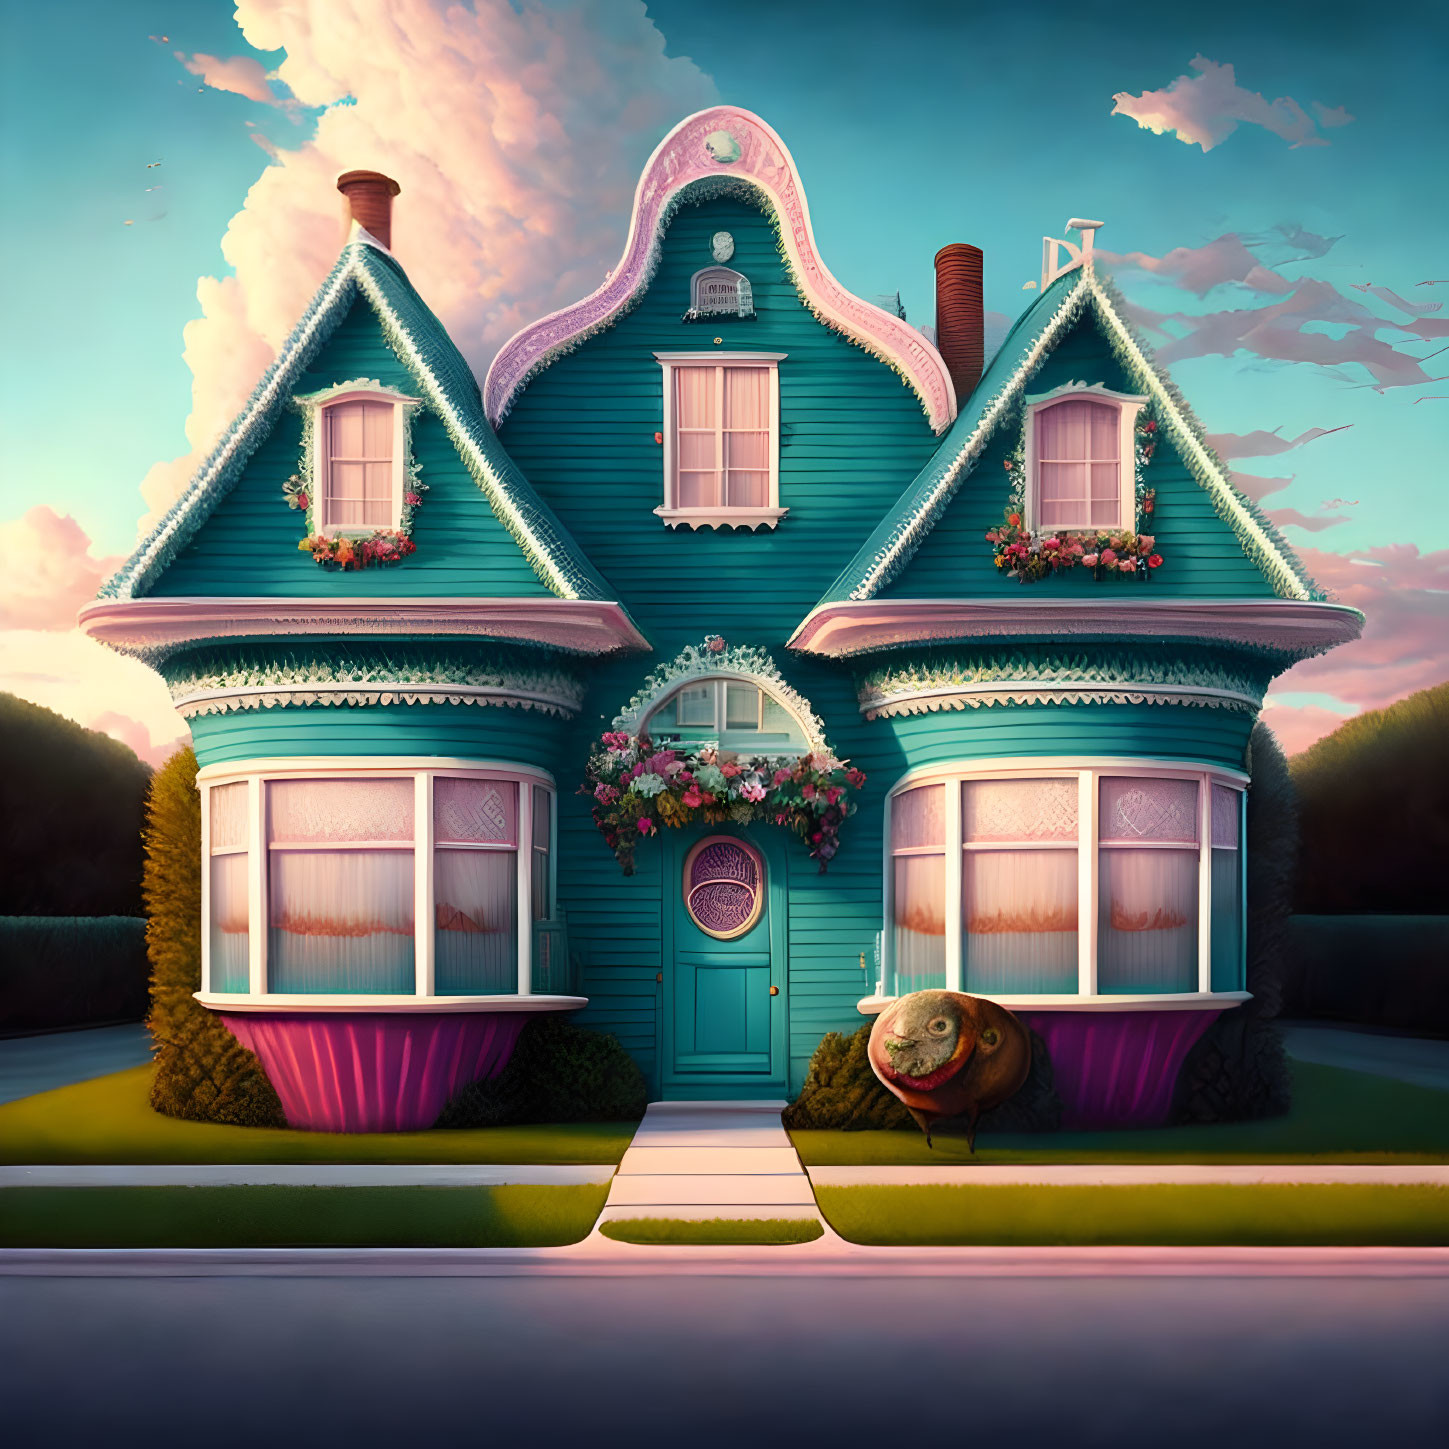 Symmetrical Blue Victorian House with Pink Accents and Snail at Dusk